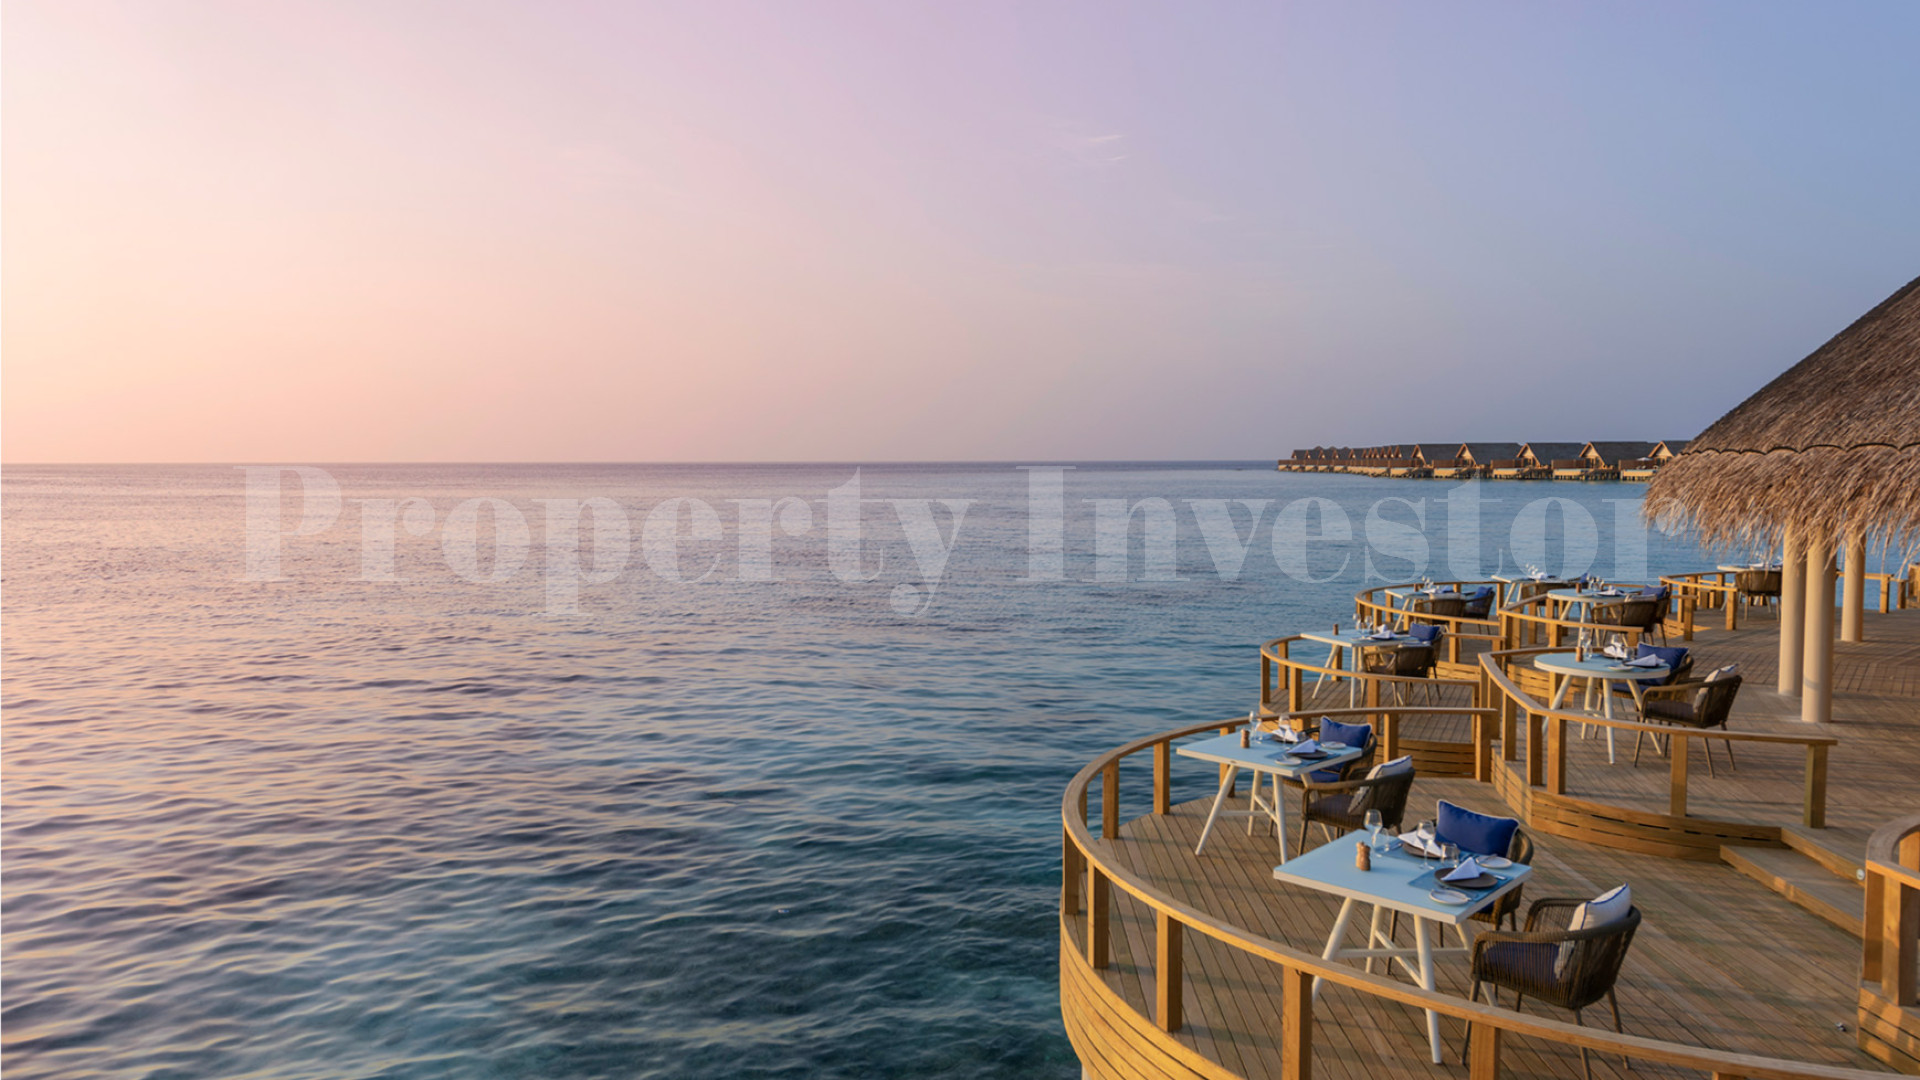 Reputable 5* Star 80 Room Luxury Island Resort for Sale in the Maldives